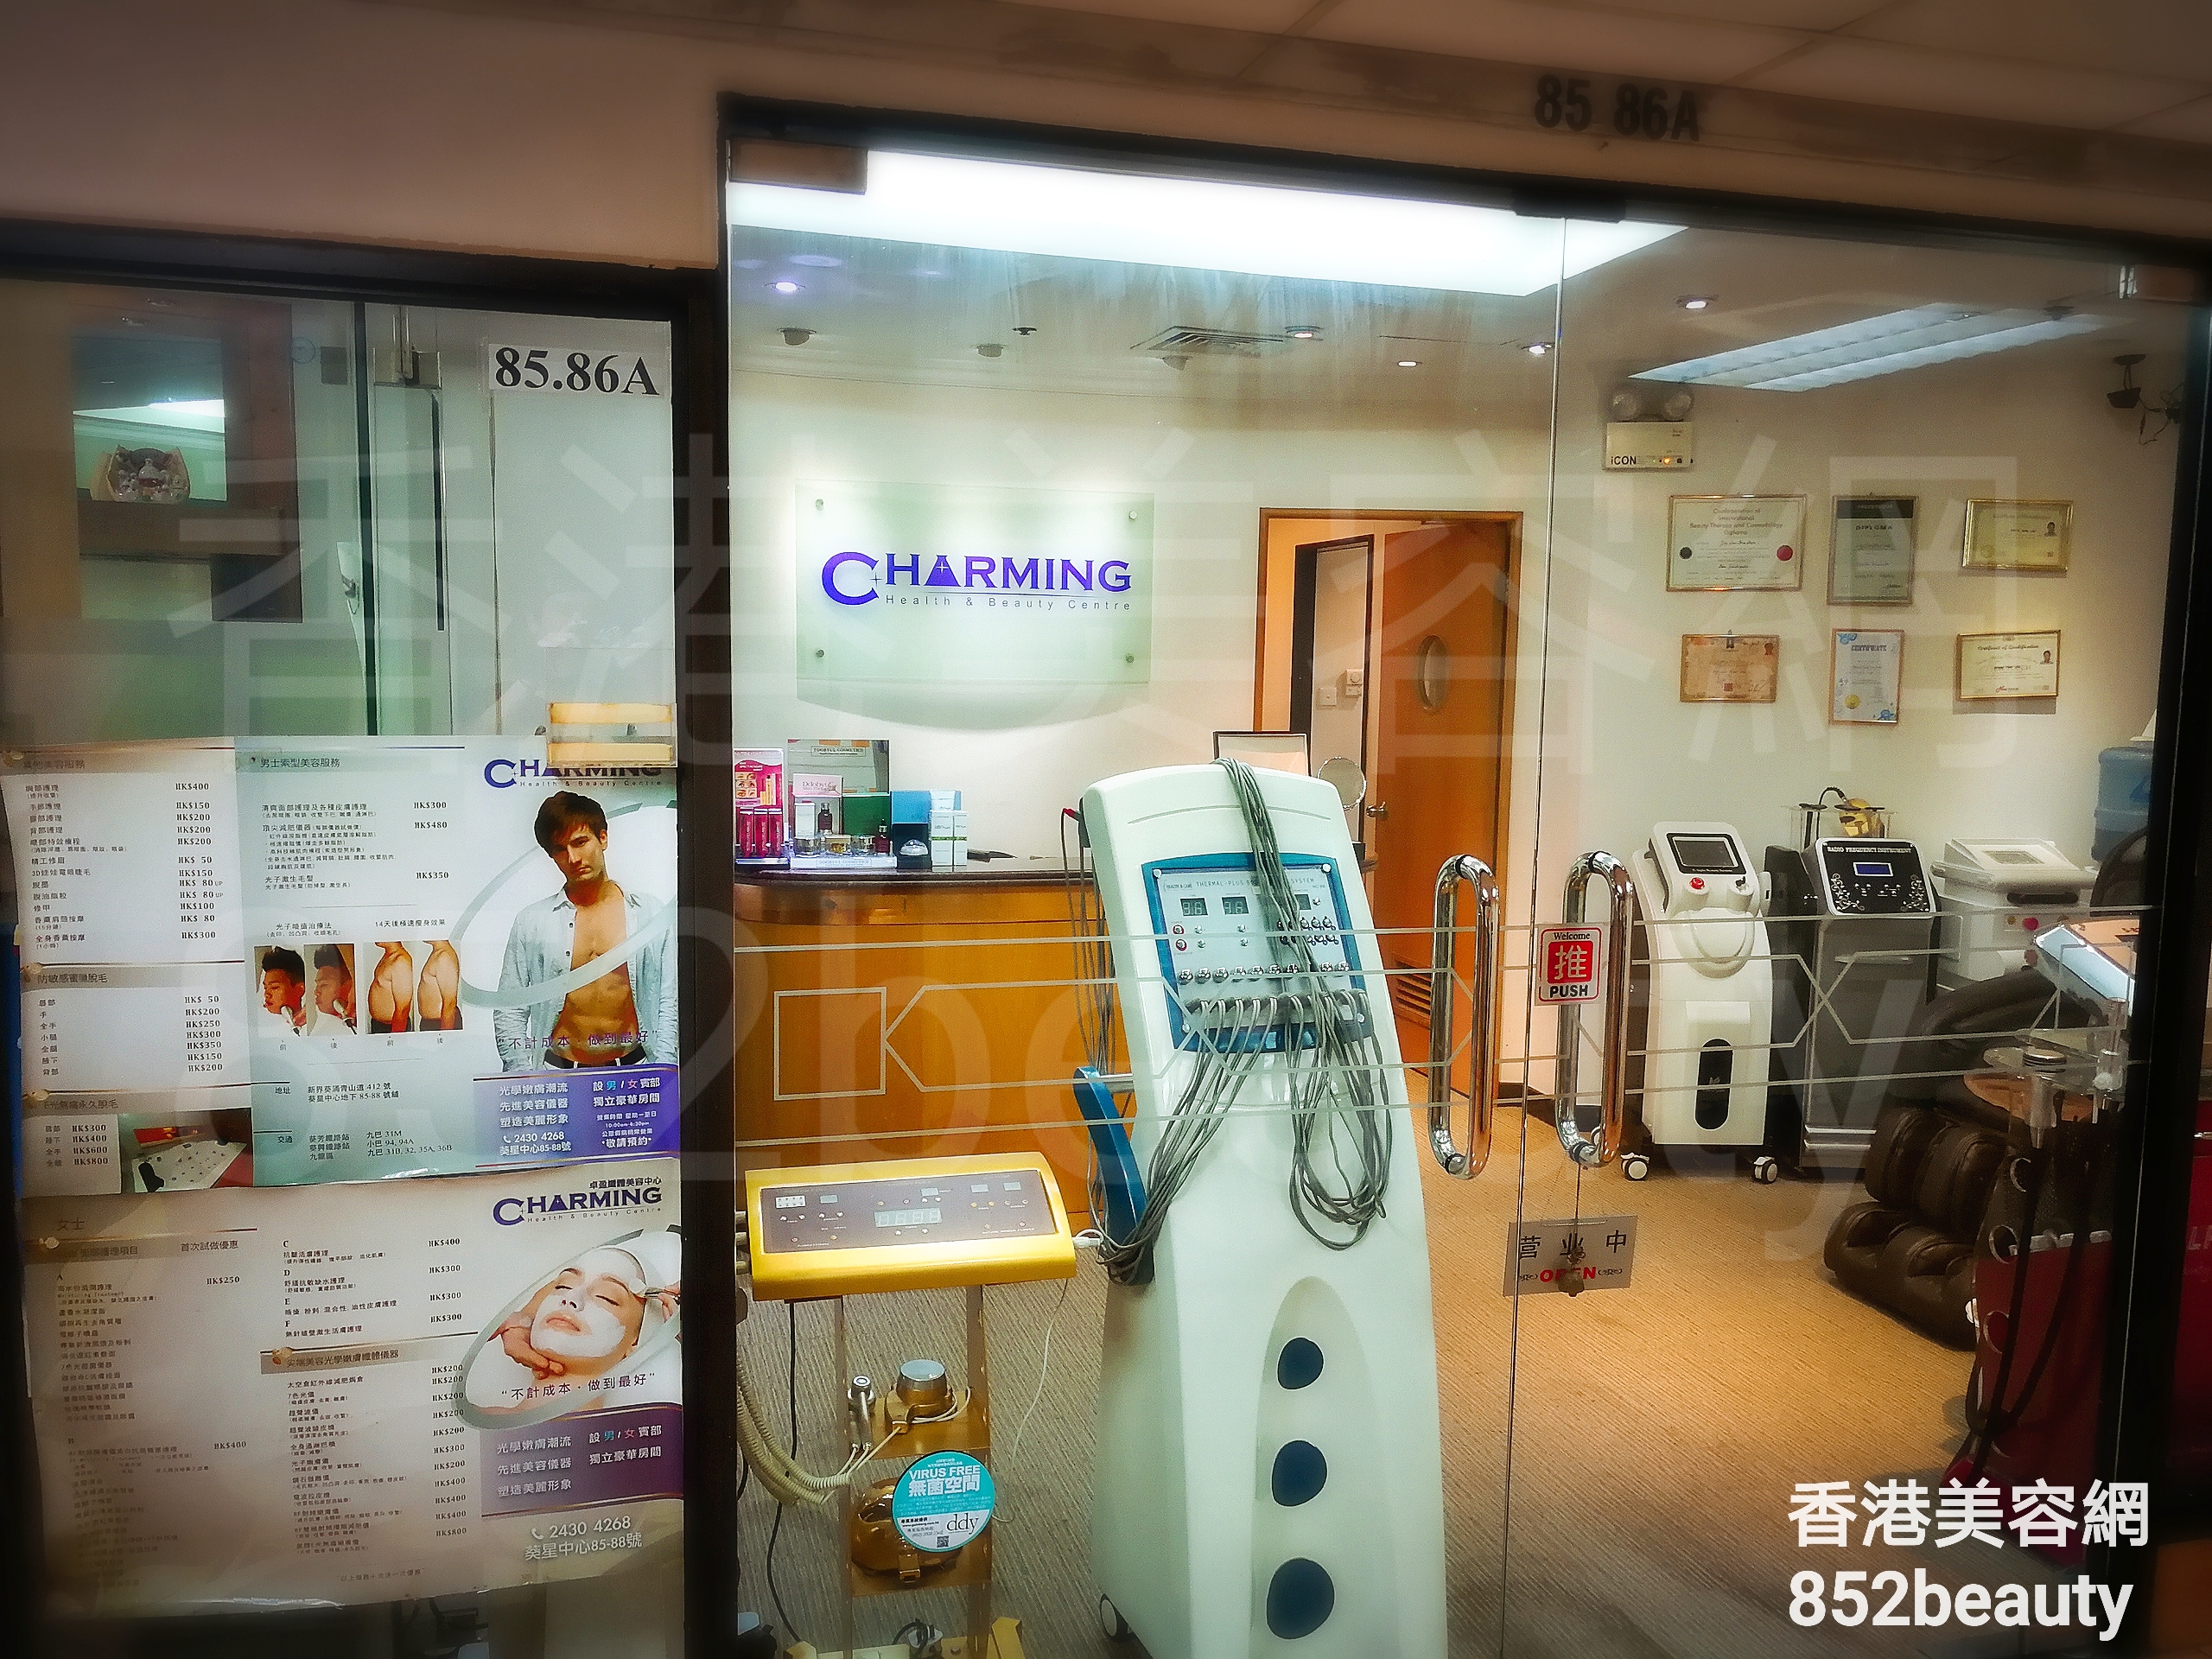 Hair Removal: Charming Health & Beauty Centre